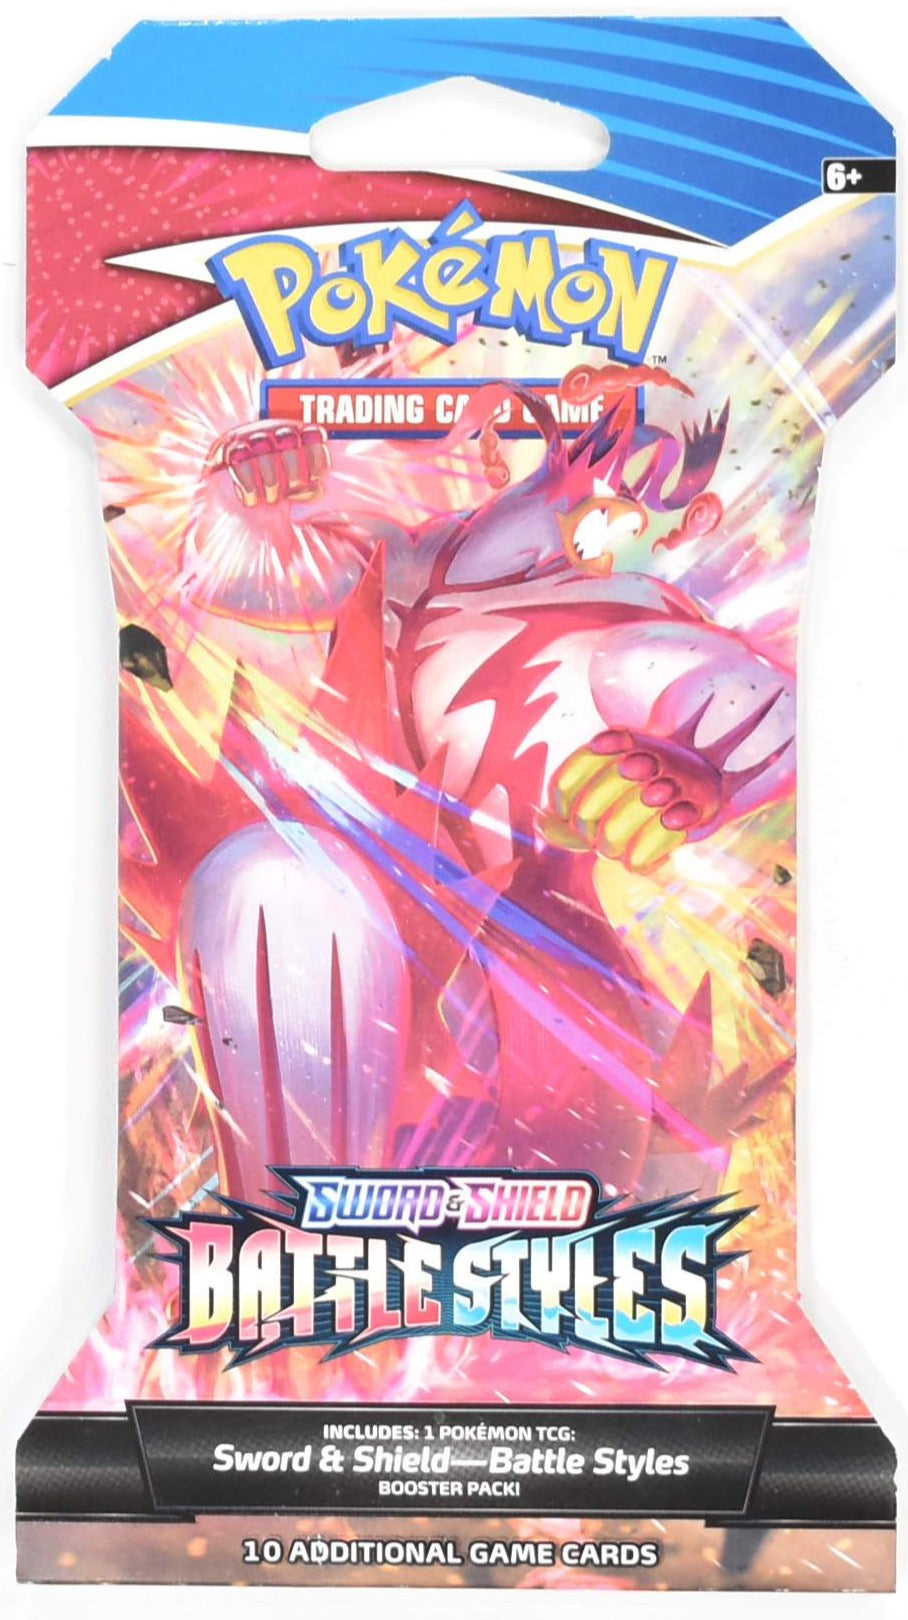 Pokemon Card Booster Pack Sword and shield Battle Styless 2021